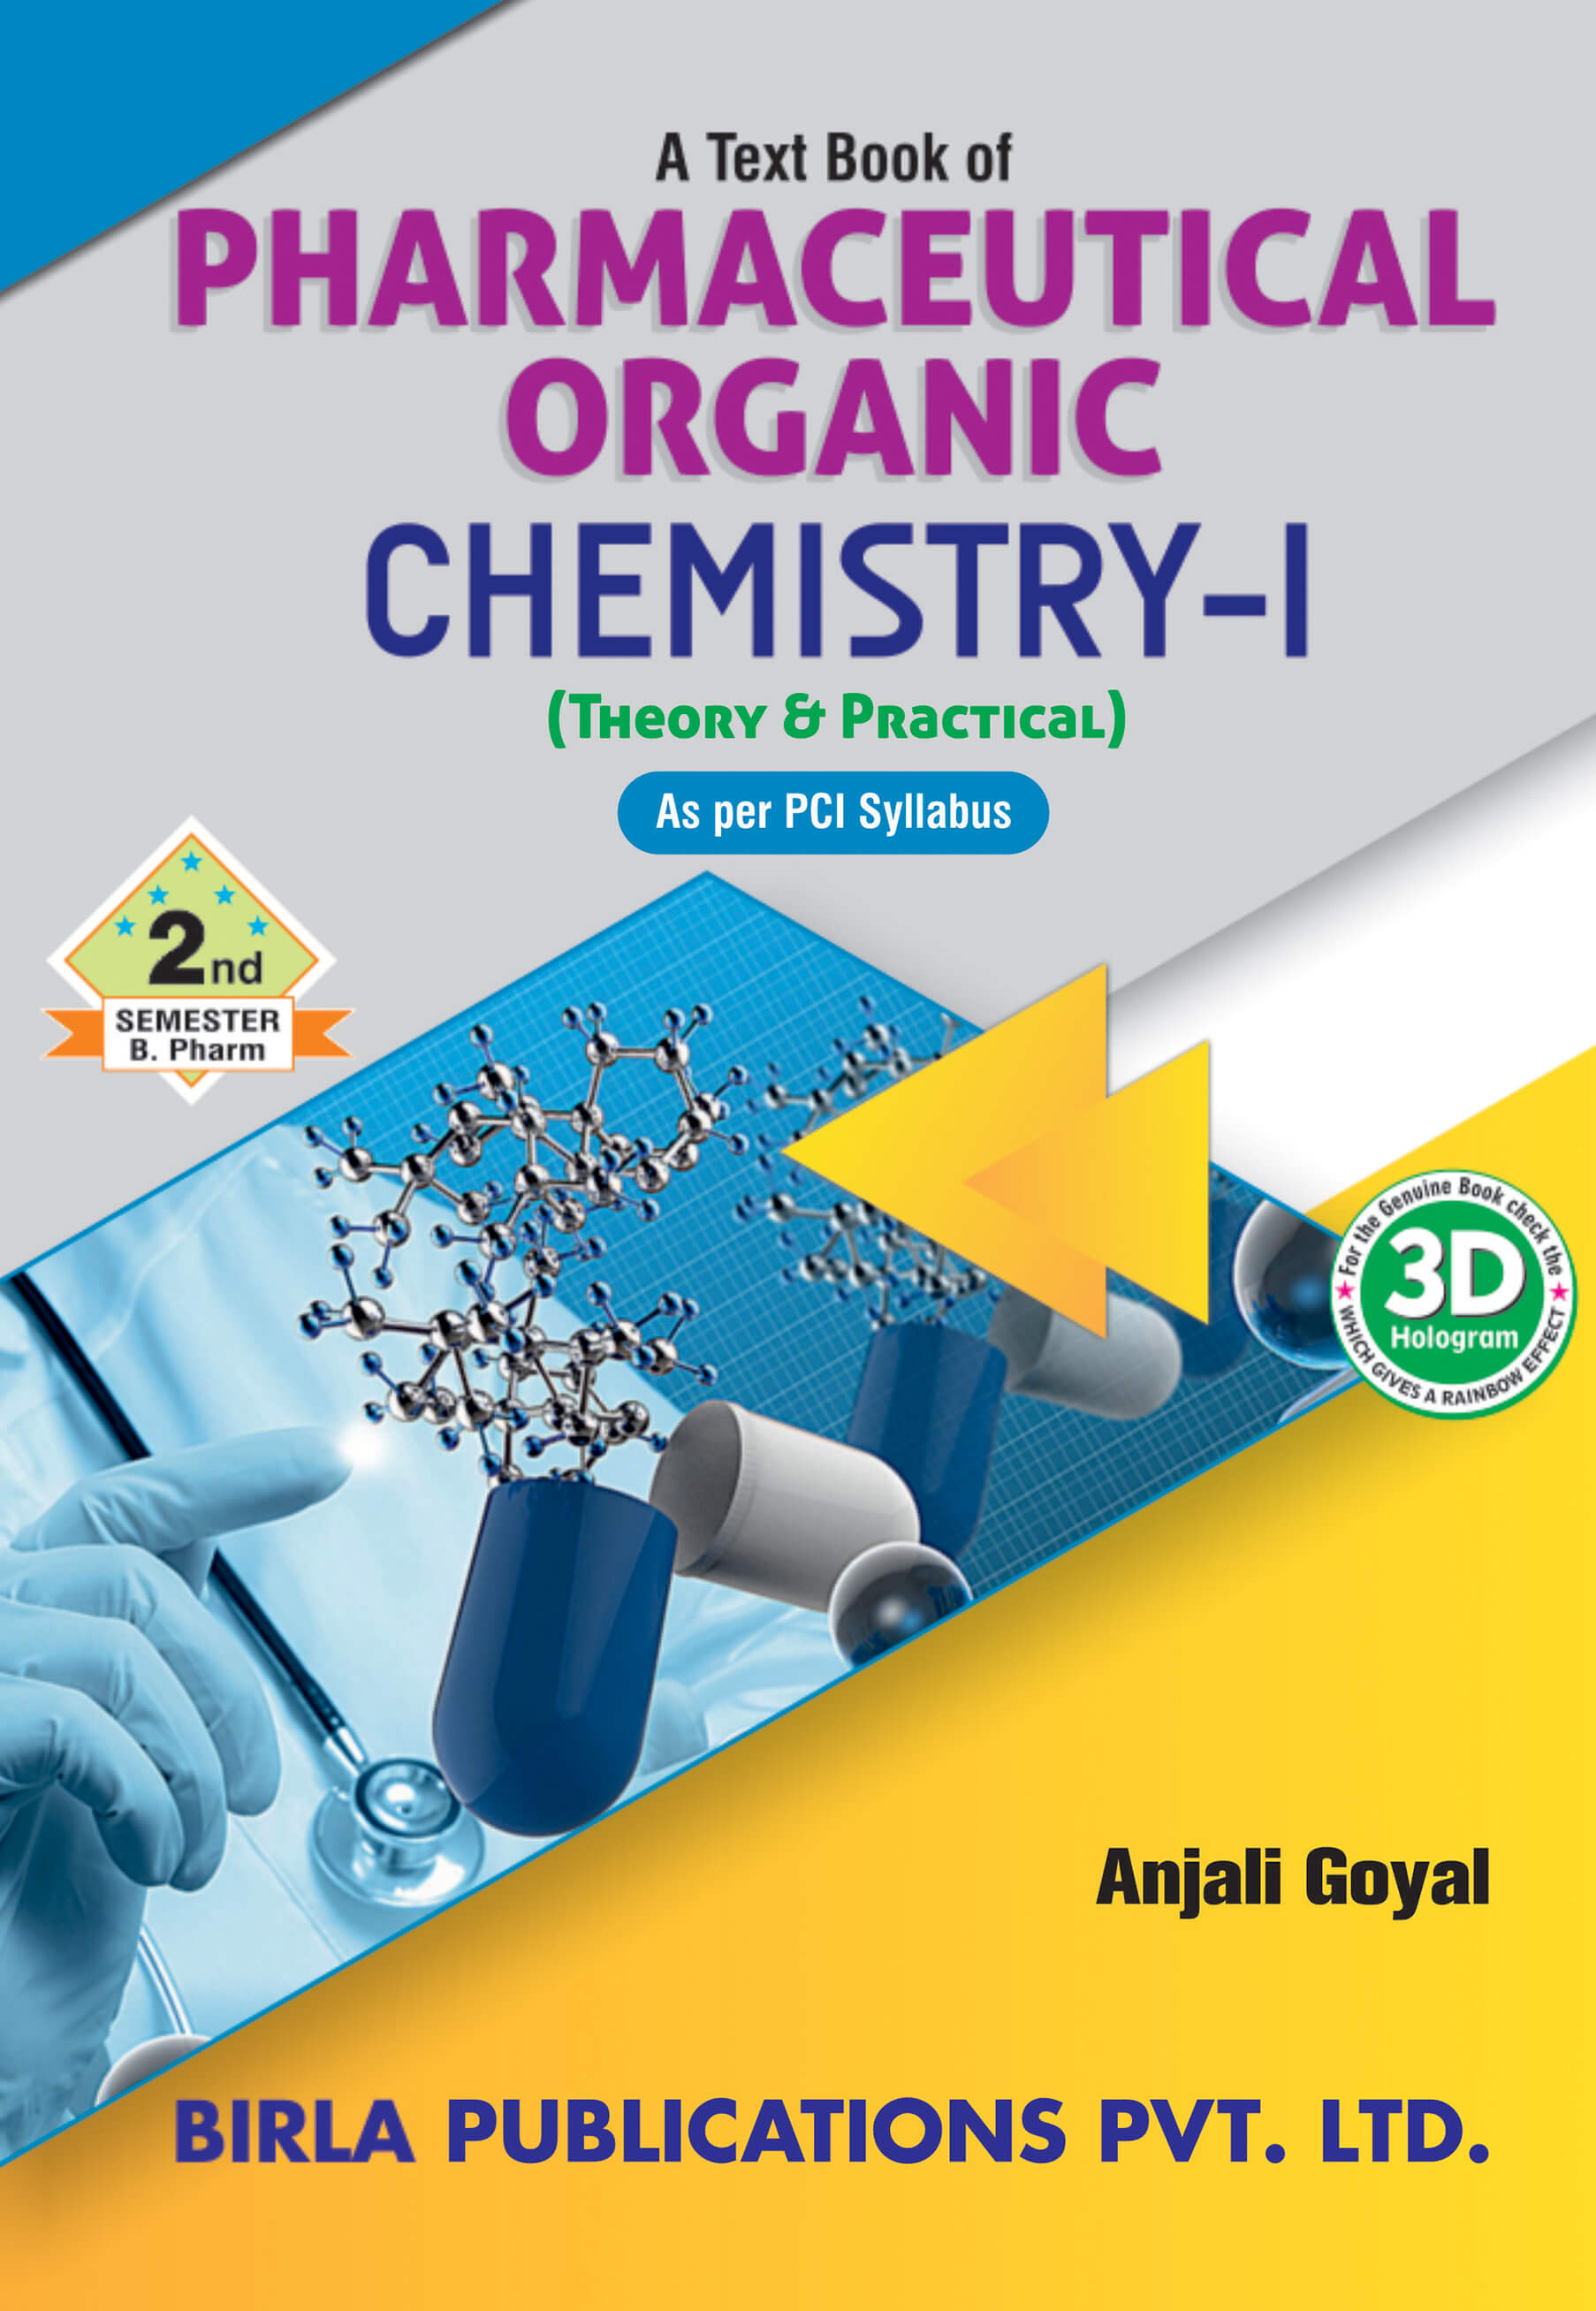 A TEXT BOOK OF PHARMACEUTICAL ORGANIC CHEMISTRY-I  (Theory & Practical )